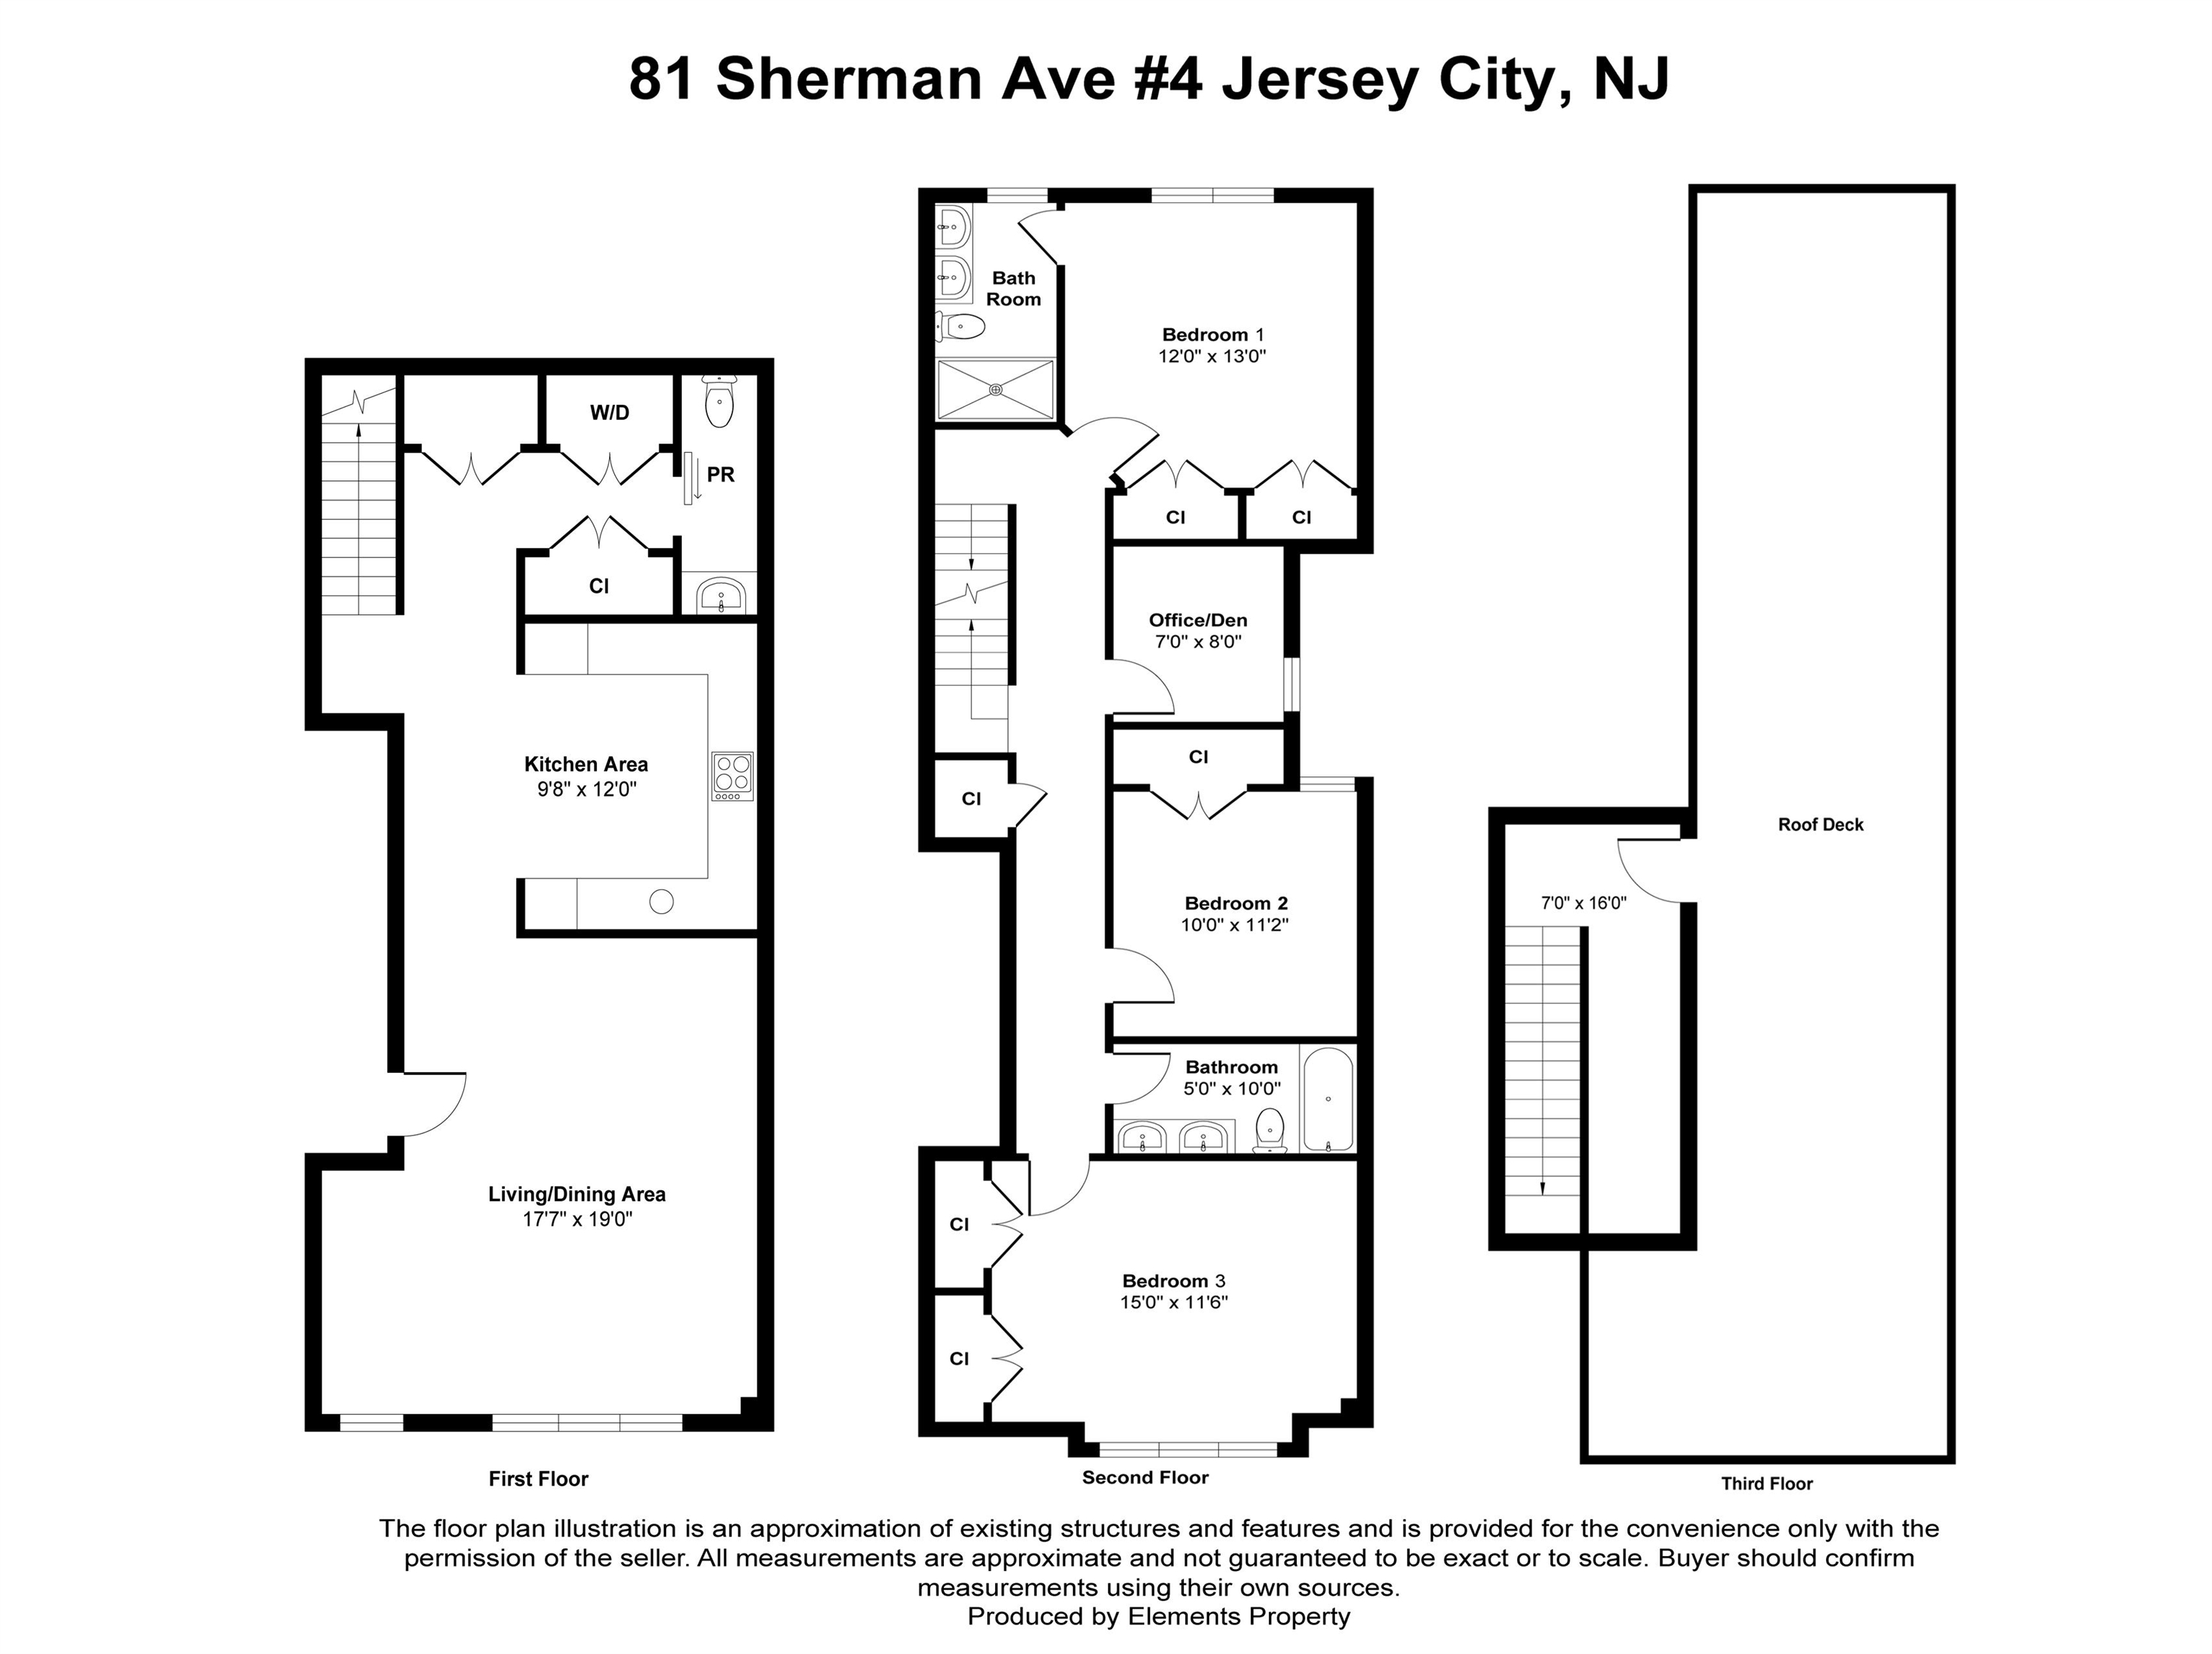 81 Sherman Ave Unit 4, Jersey City, New Jersey, 07307, United States, 4 Bedrooms Bedrooms, ,3 BathroomsBathrooms,Residential,For Sale,81 Sherman Ave Unit 4,1499198